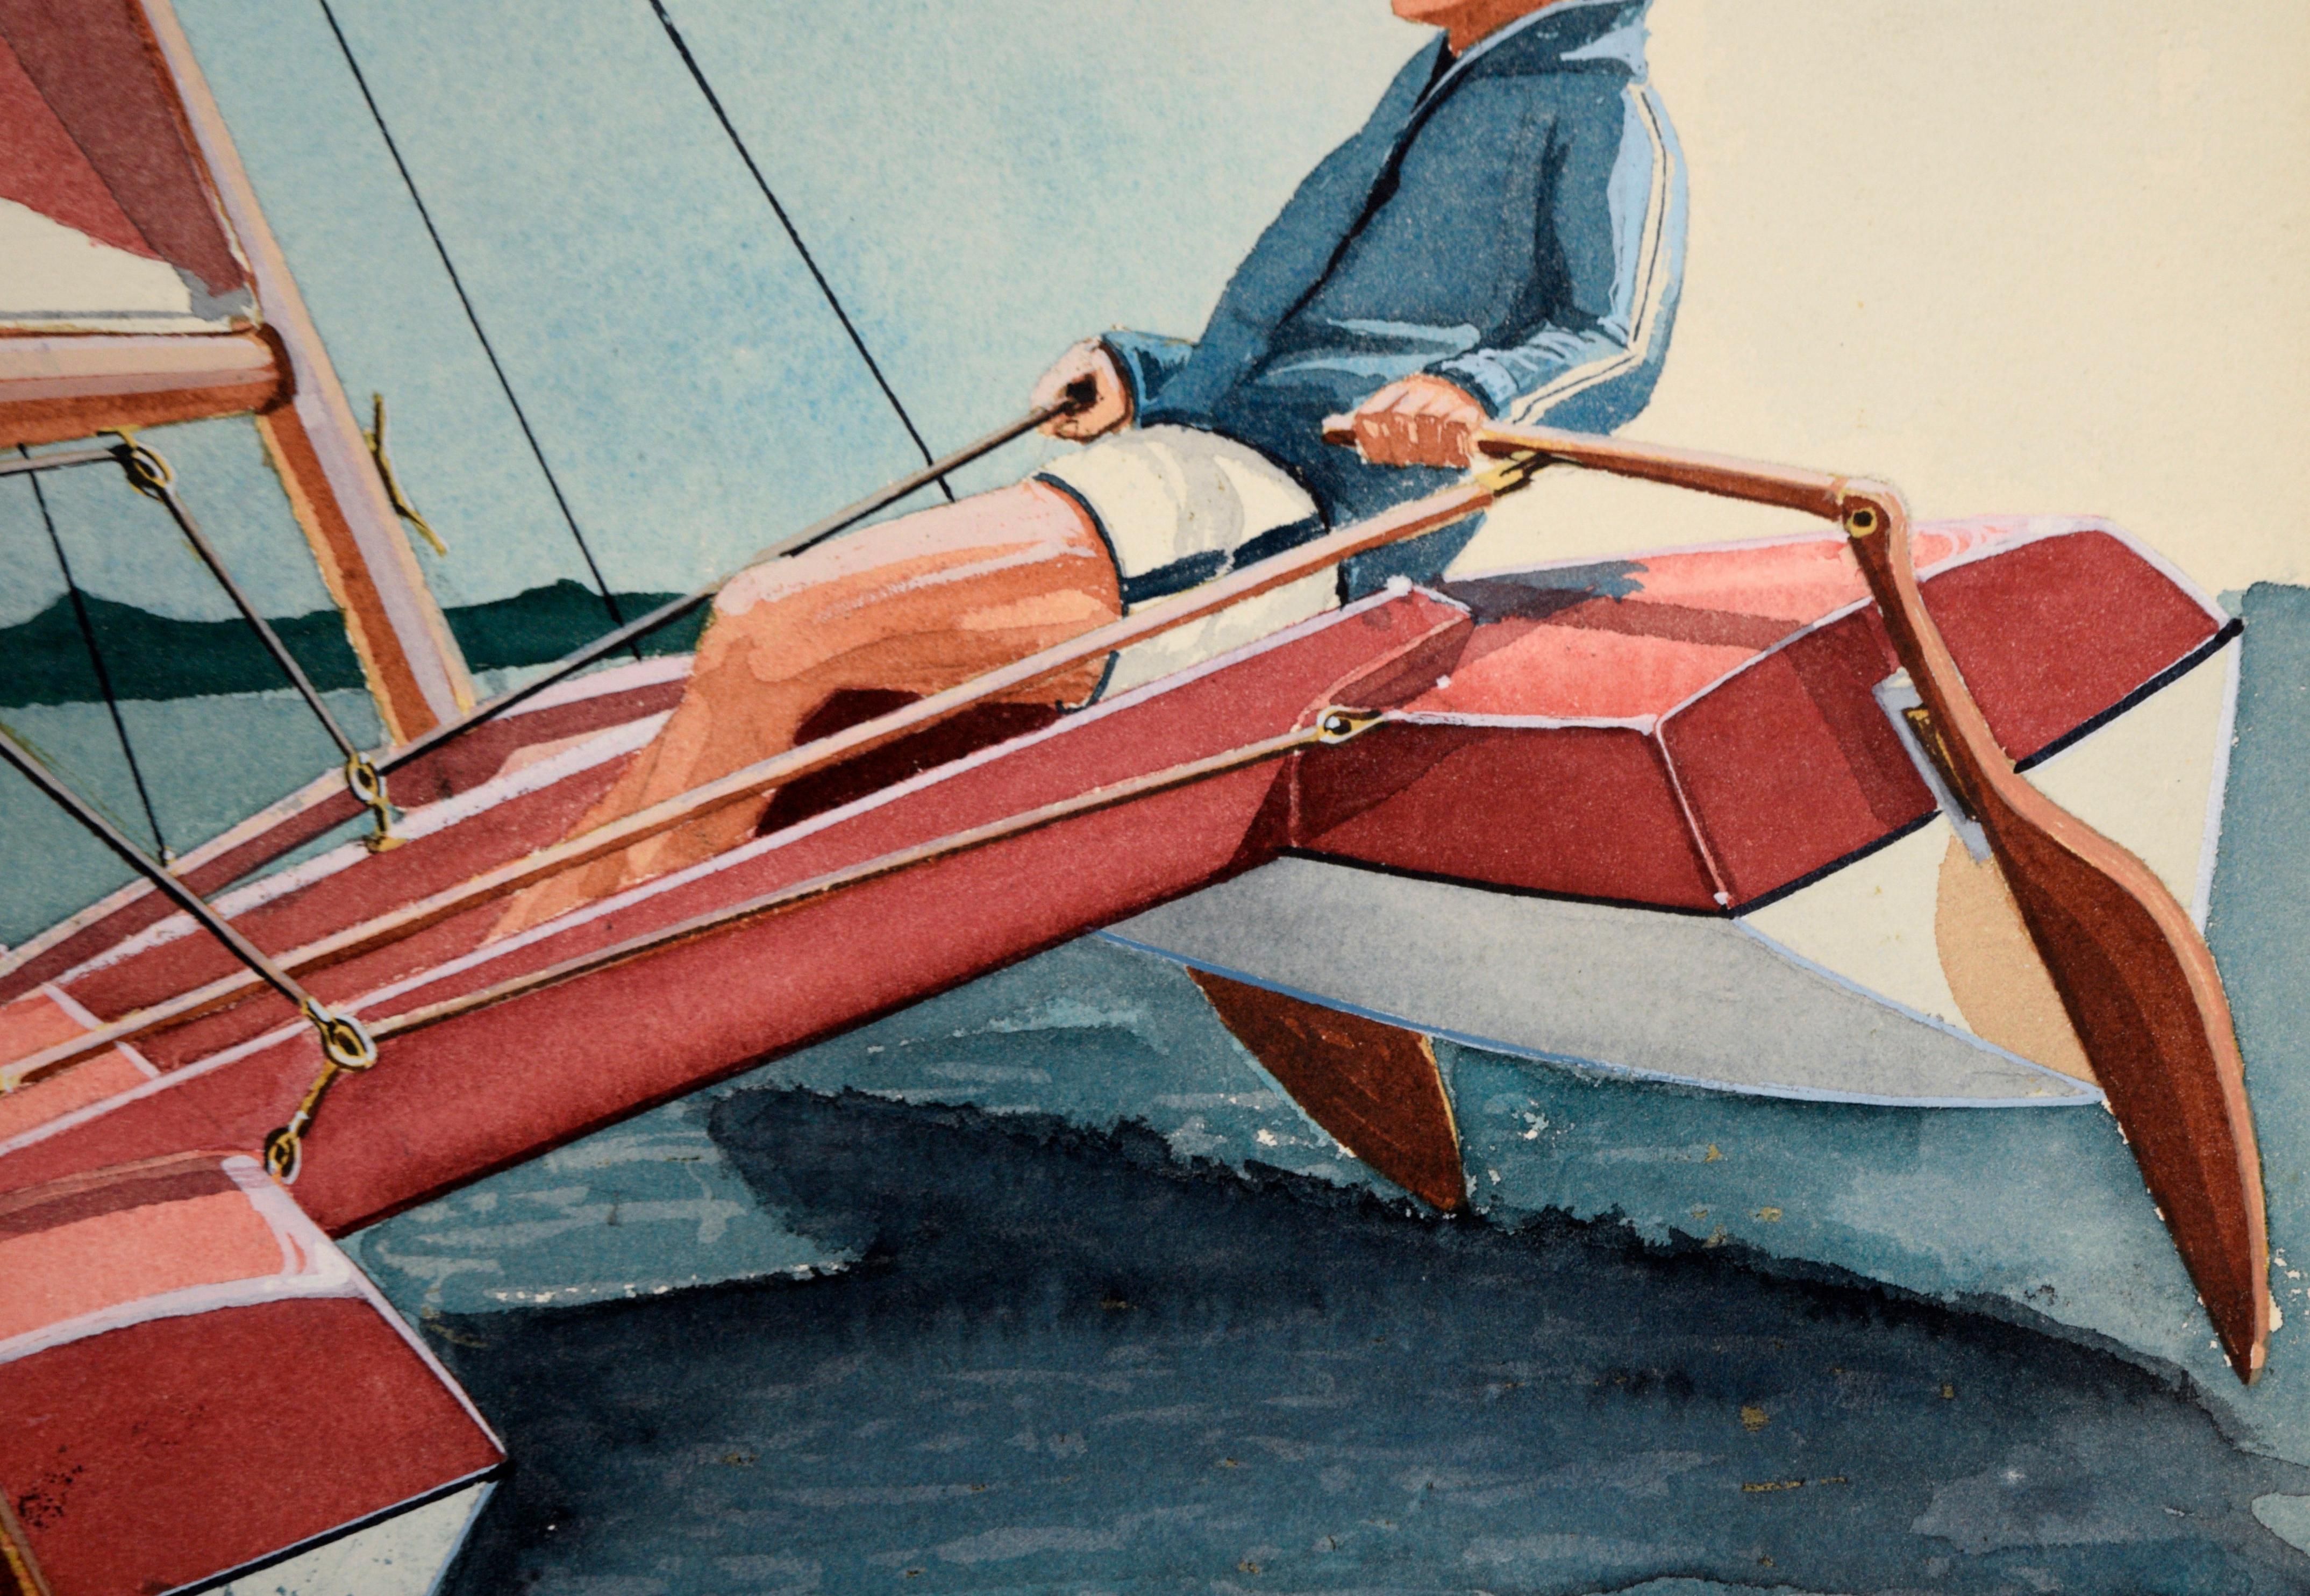 Solo Race in a Catamaran - Adventure Illustration in Watercolor and Ink on Paper - Pop Art Art by Edward T. Liljenwall